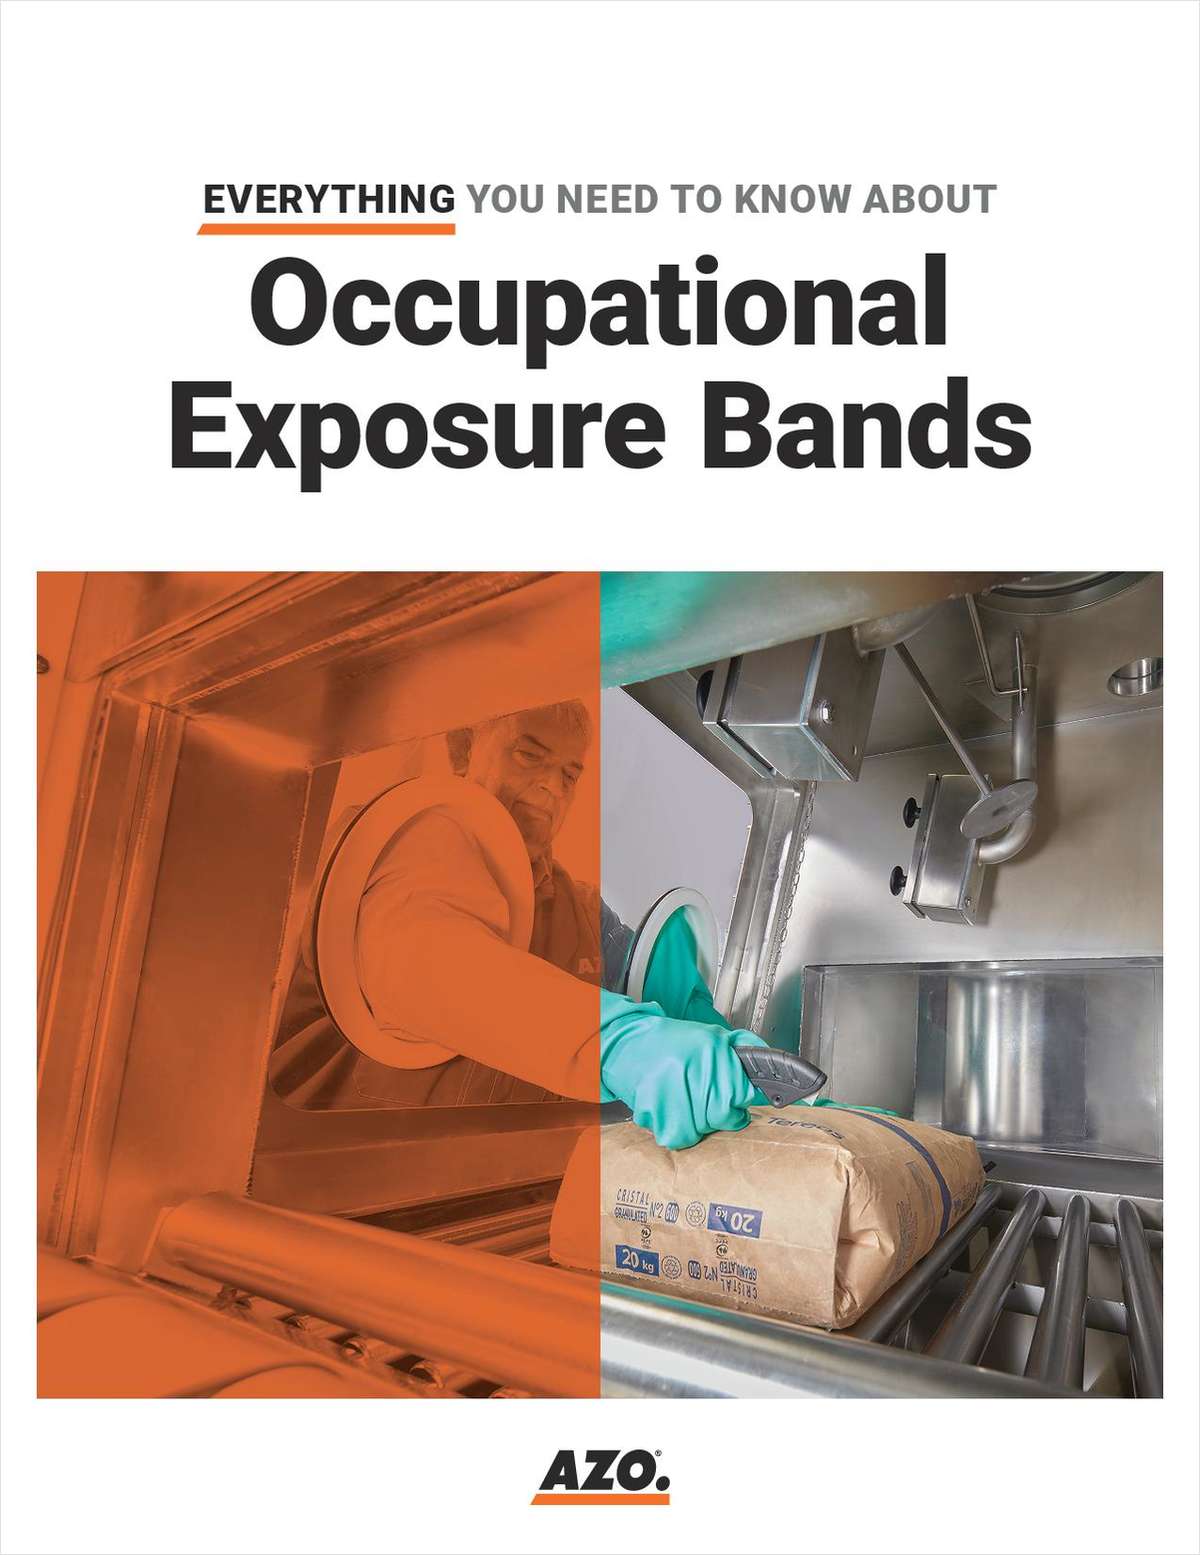 Everything You Need to Know About Occupational Exposure Bands